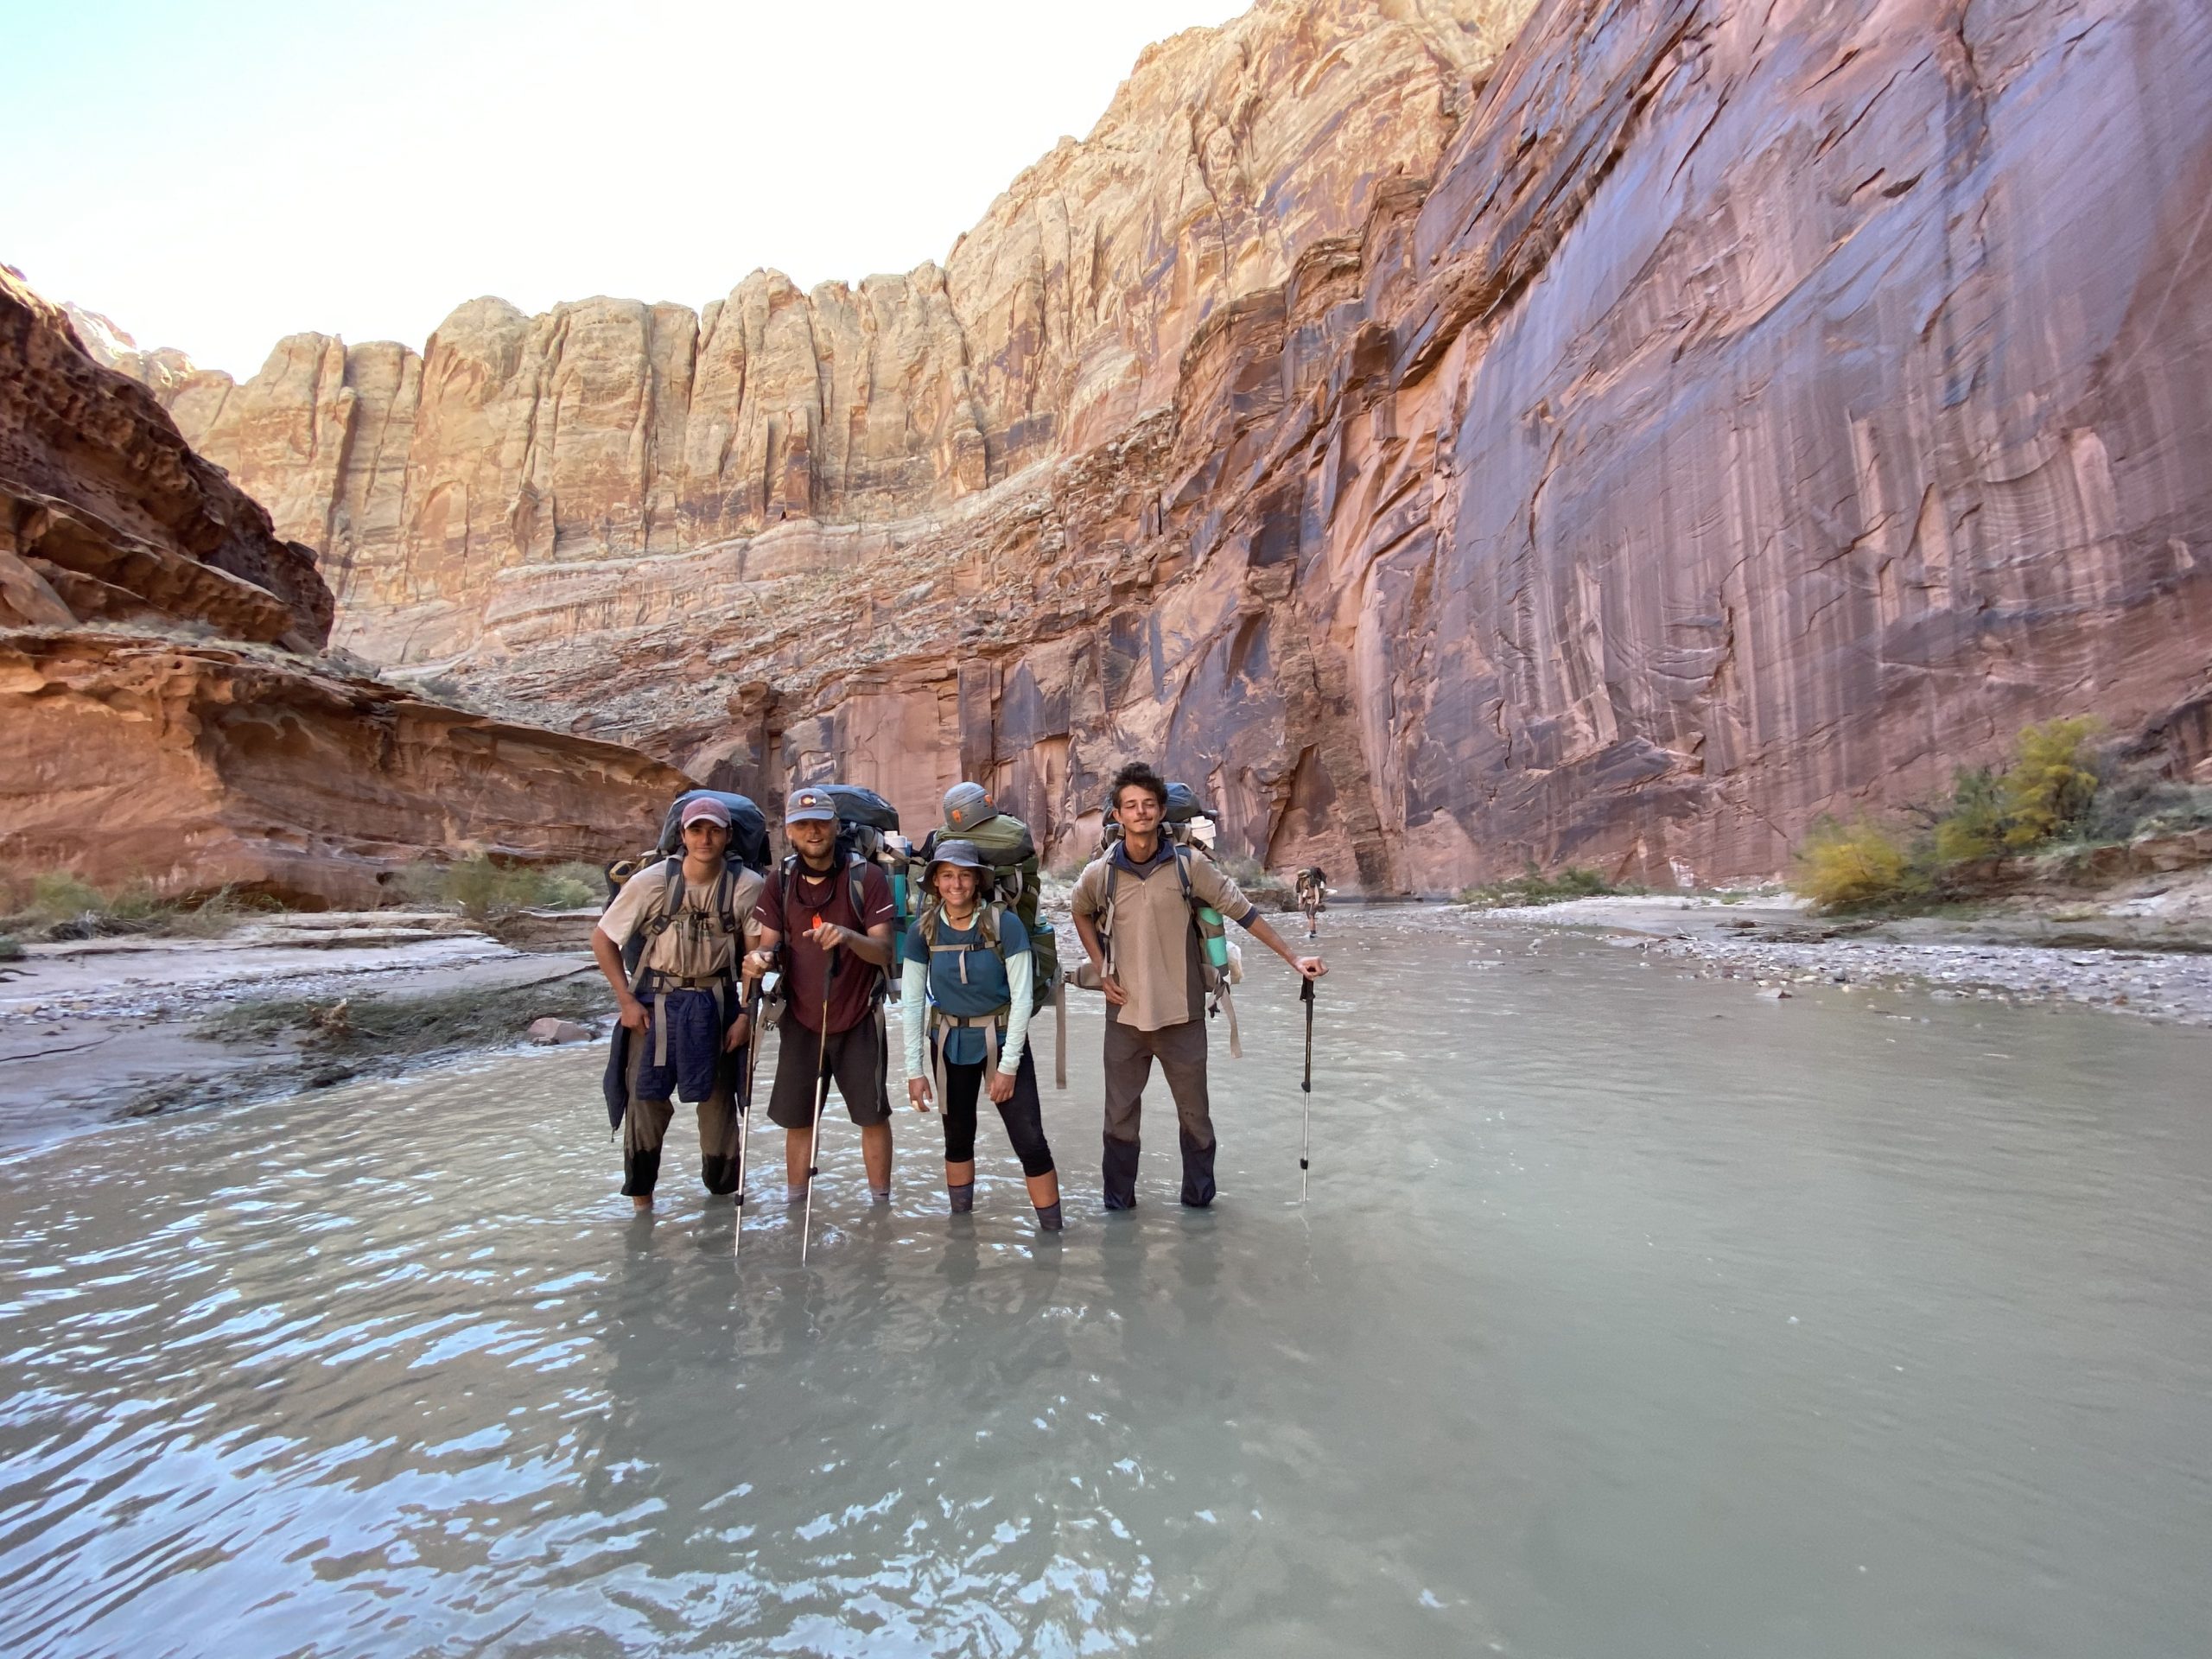 gap year students on semester expedition in utah hike through water in a canyon with backpacks on.